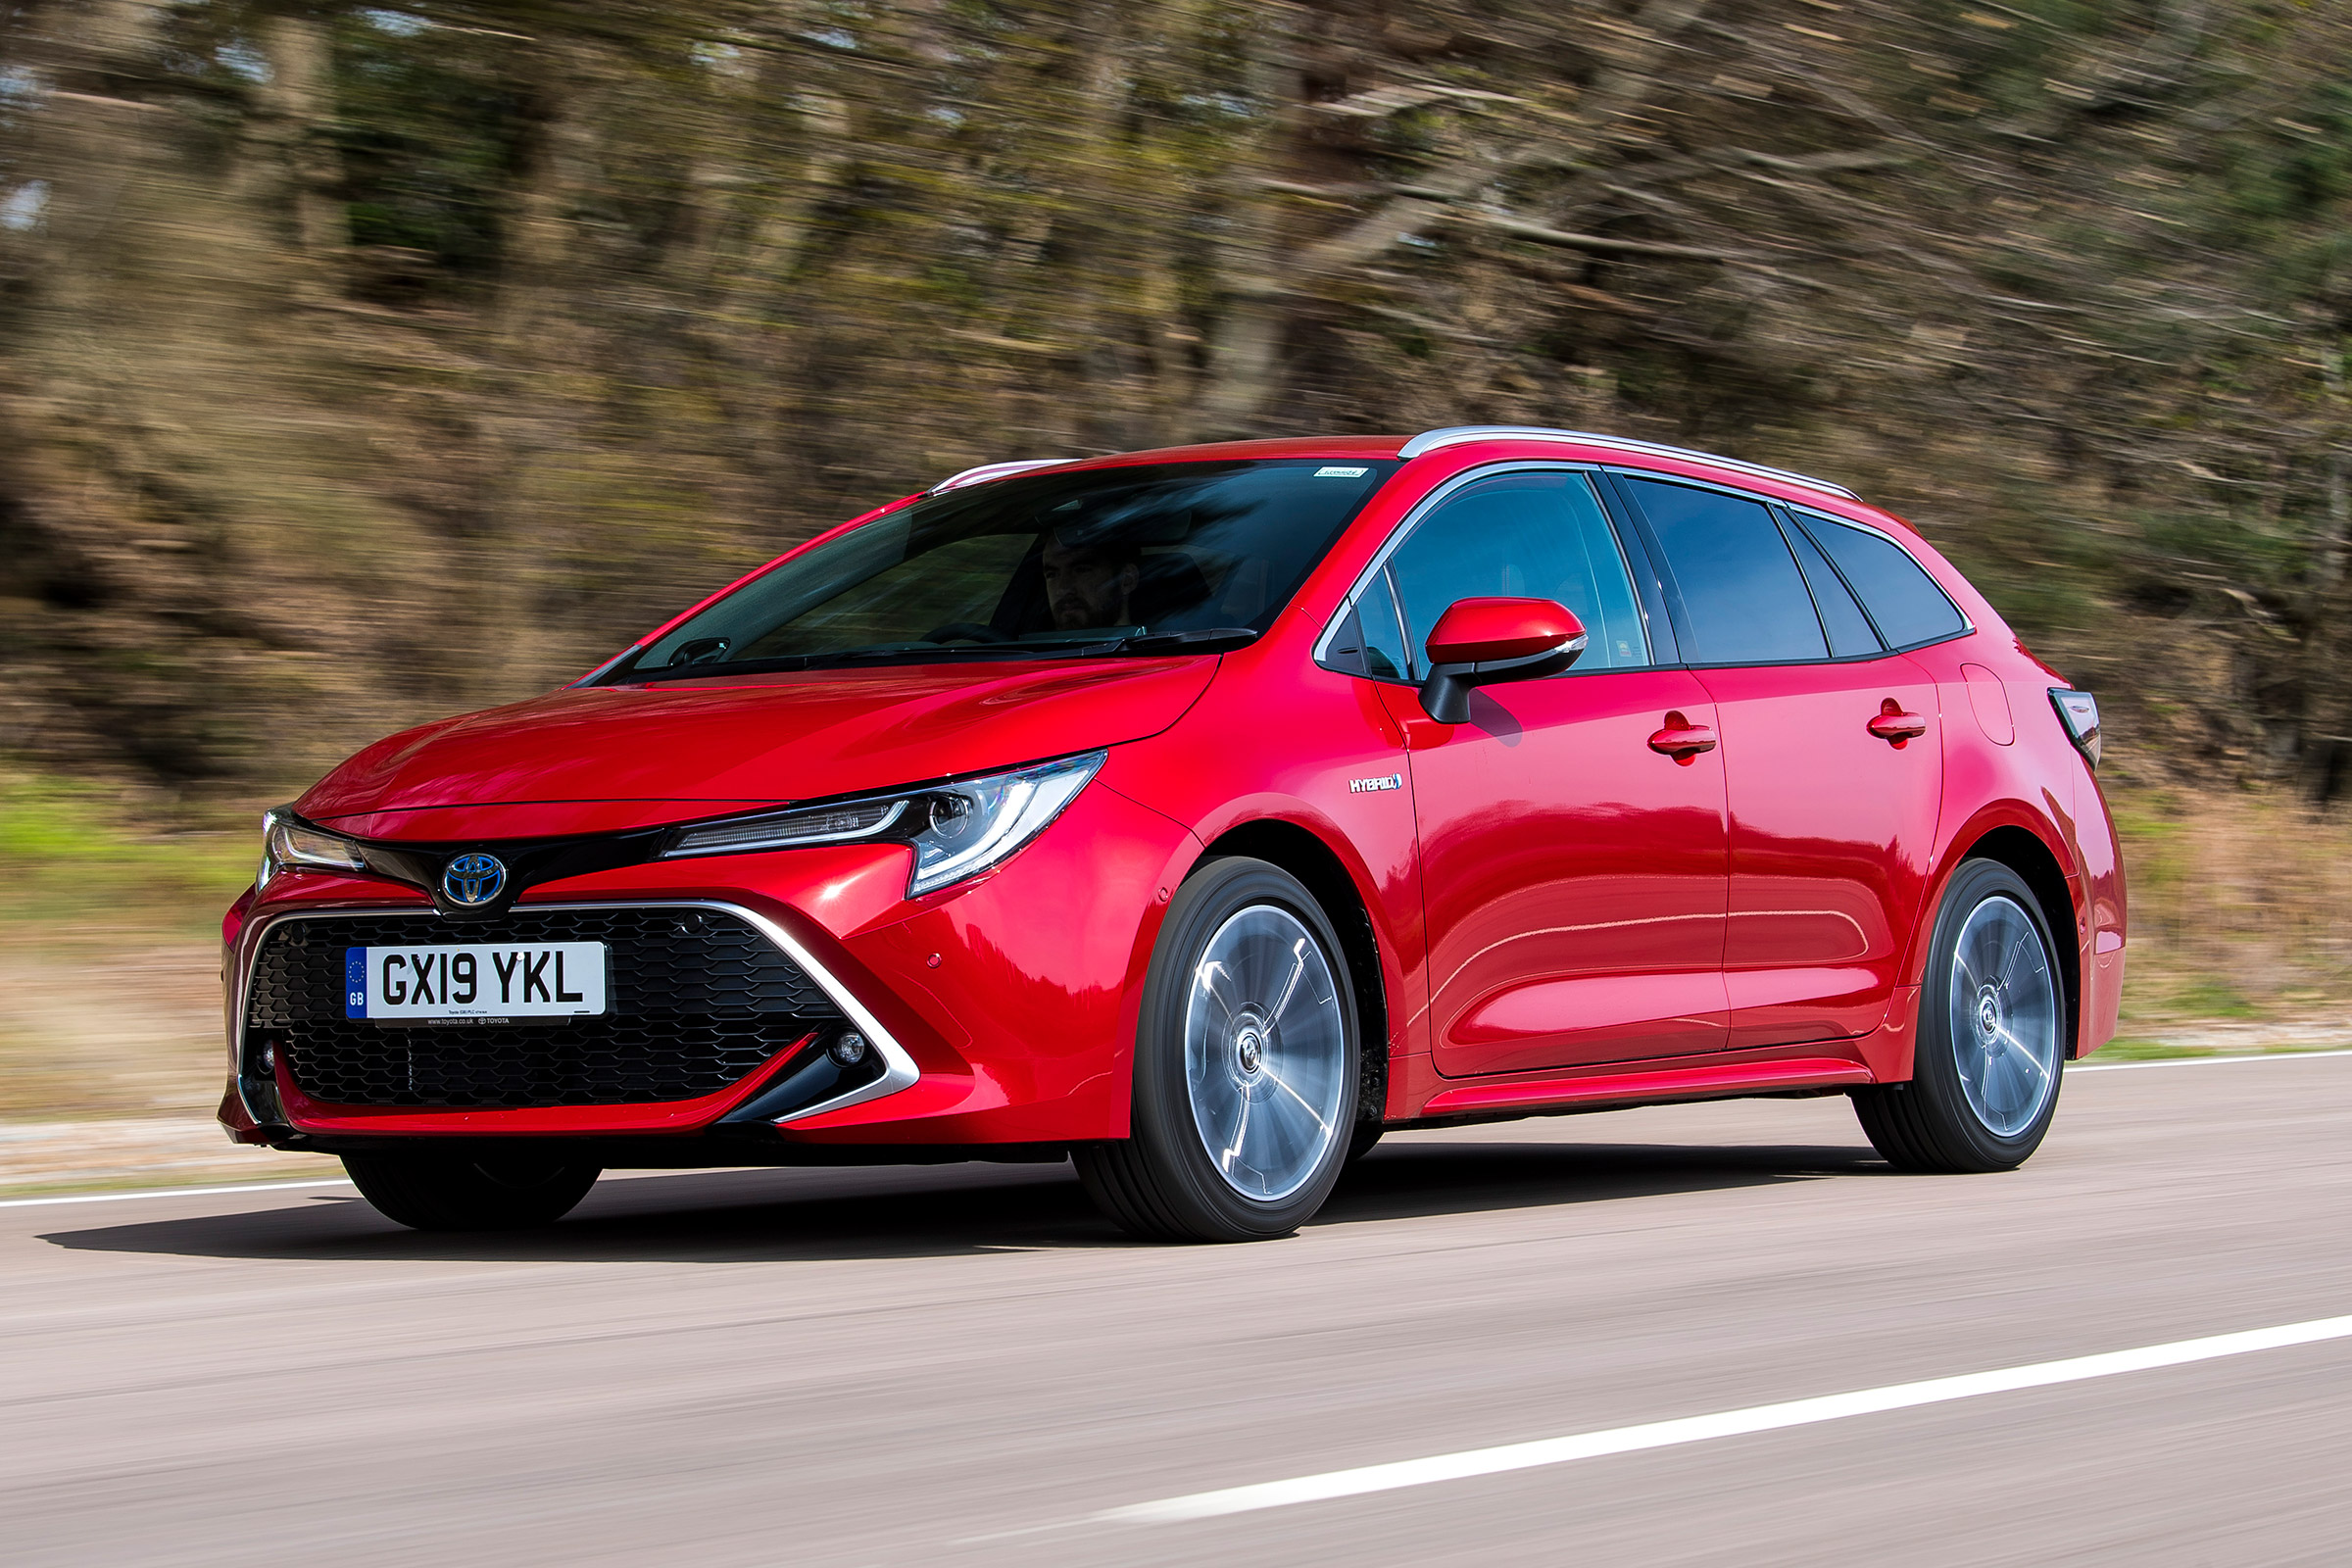 52 HQ Pictures 2019 Toyota Corolla Sports Edition - Toyota Corolla Touring Sports 1.8 Hybrid First Edition ...